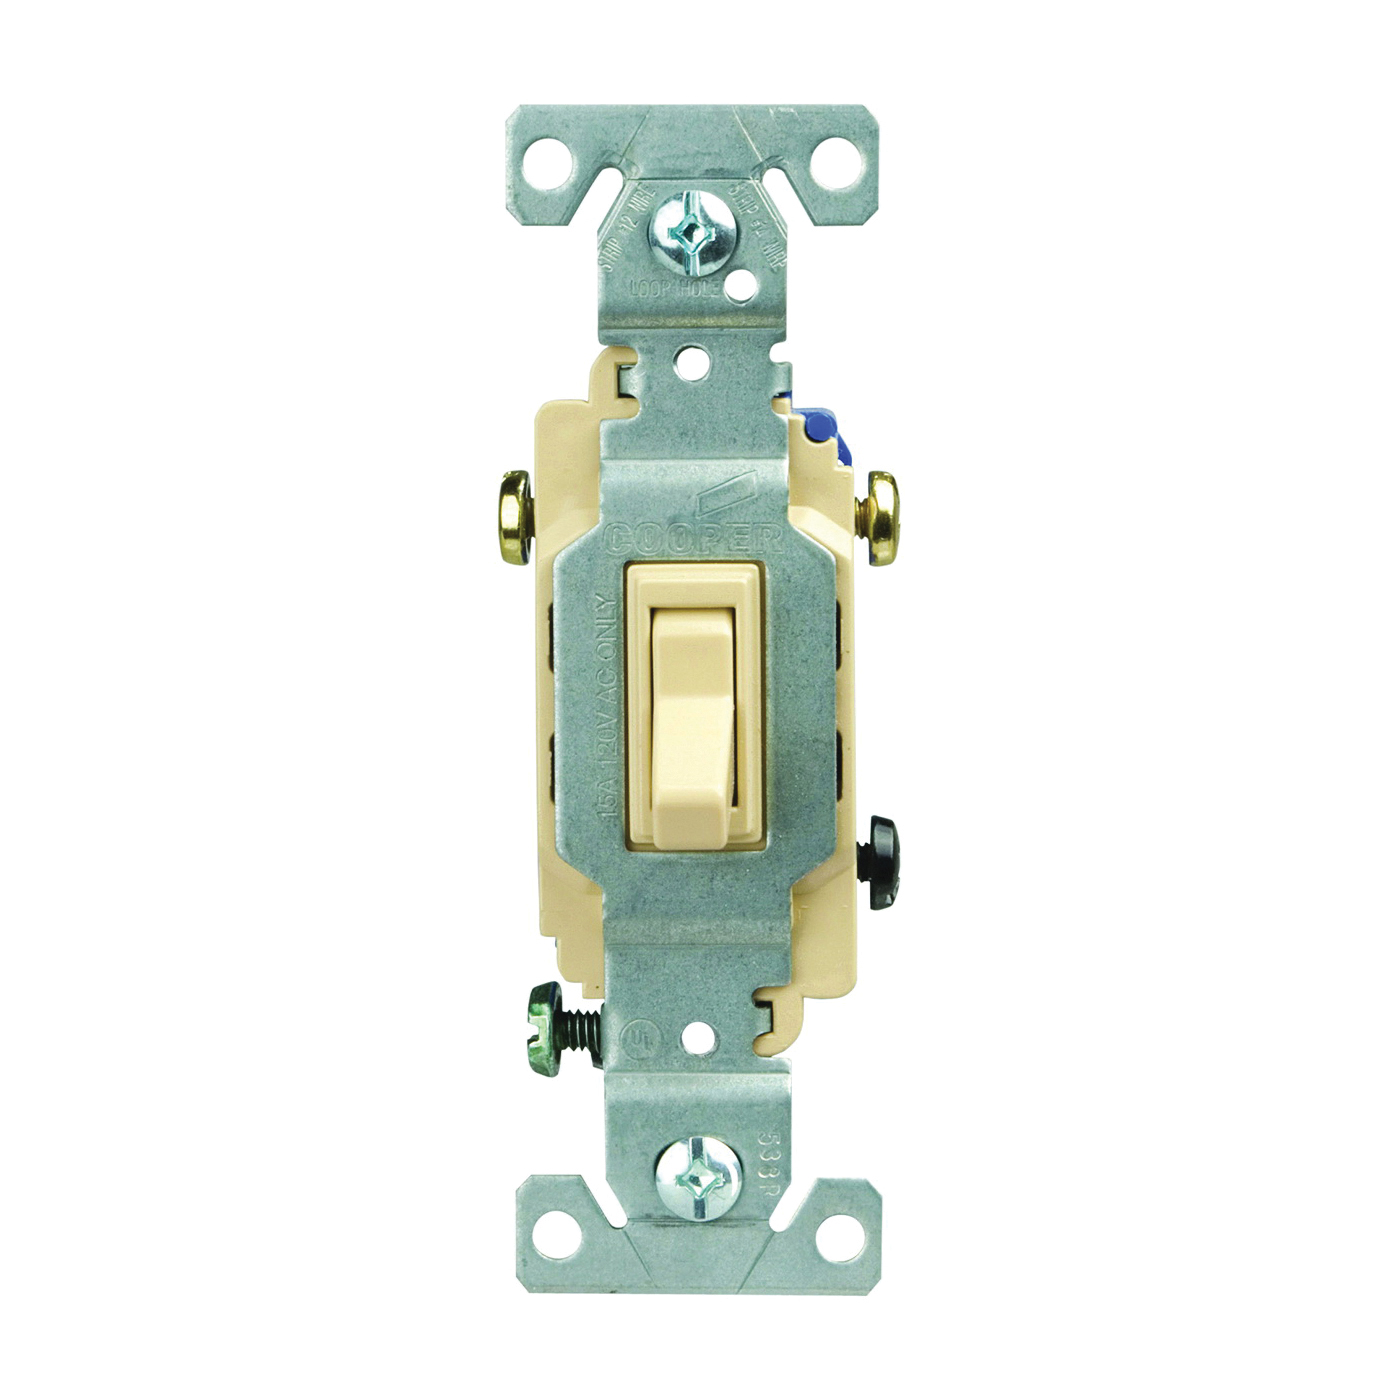 C1303-7V Toggle Switch, 15 A, 120 V, Push-In Terminal, Polycarbonate Housing Material, Ivory